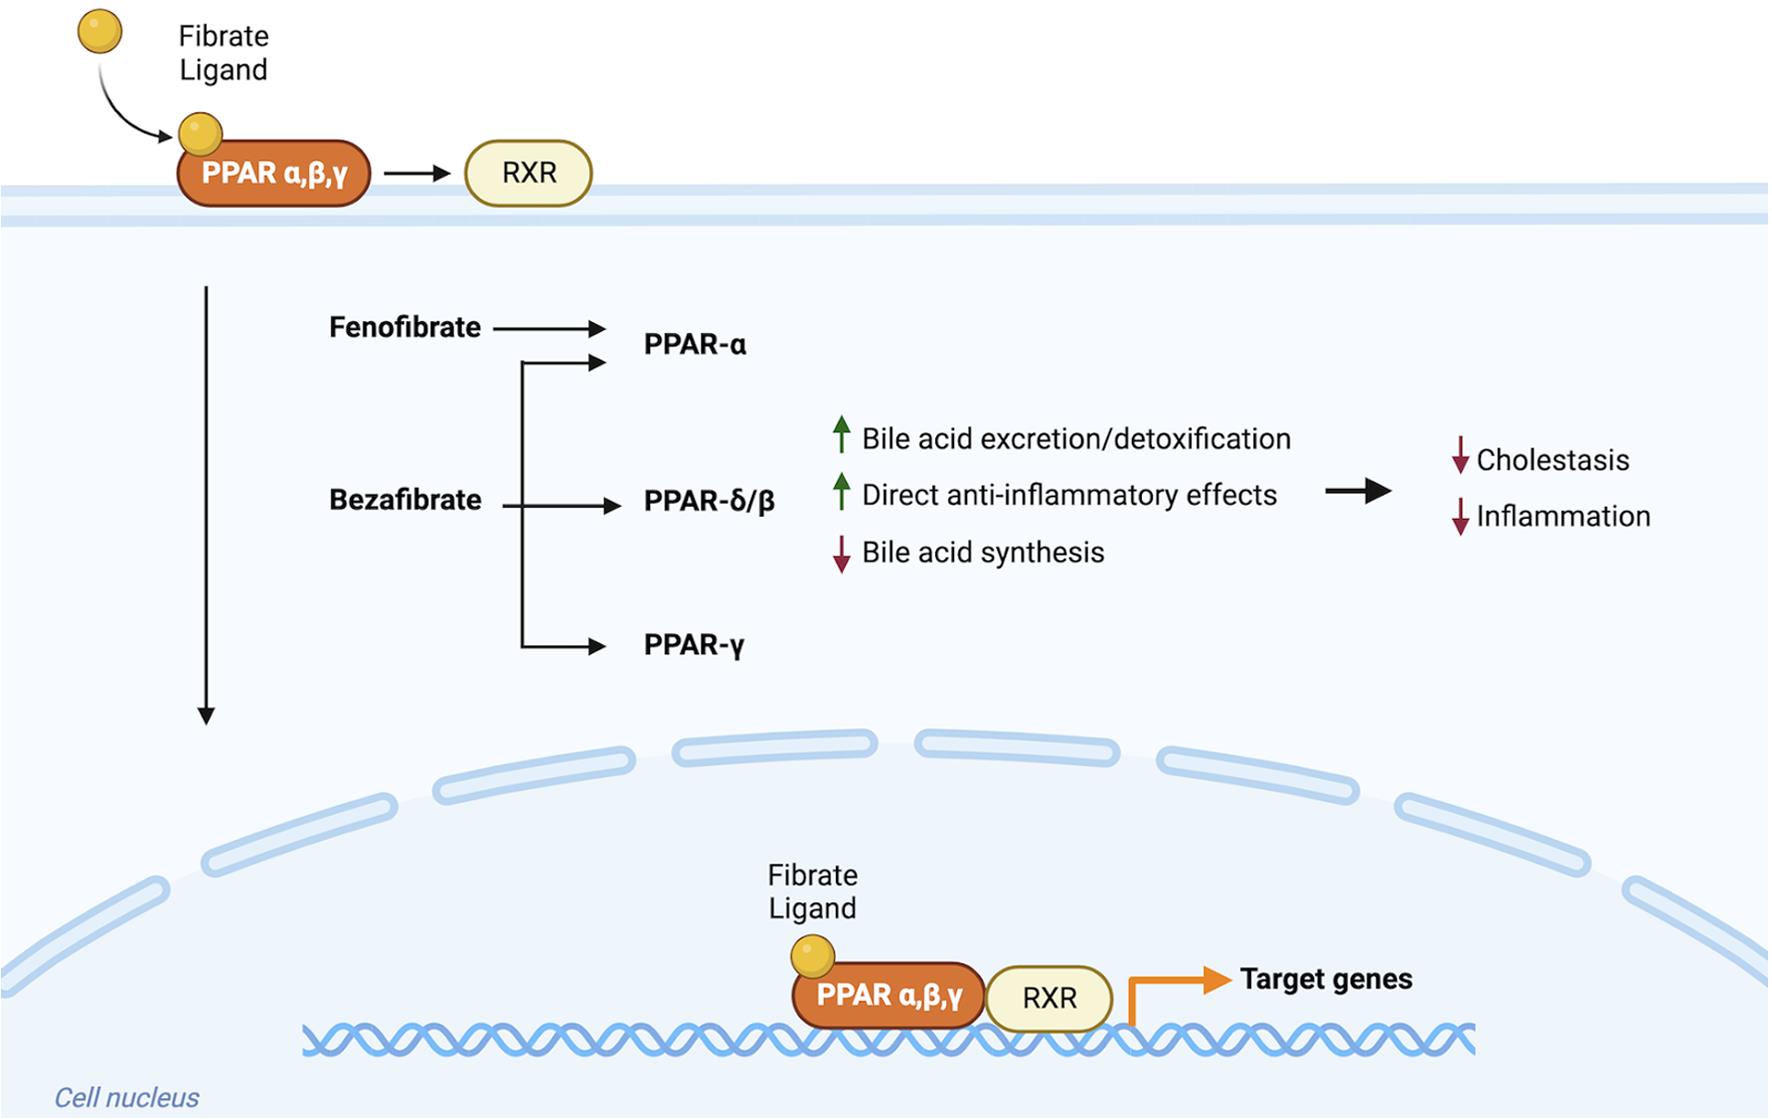 Proposed mechanisms of action of fibrates in PBC.